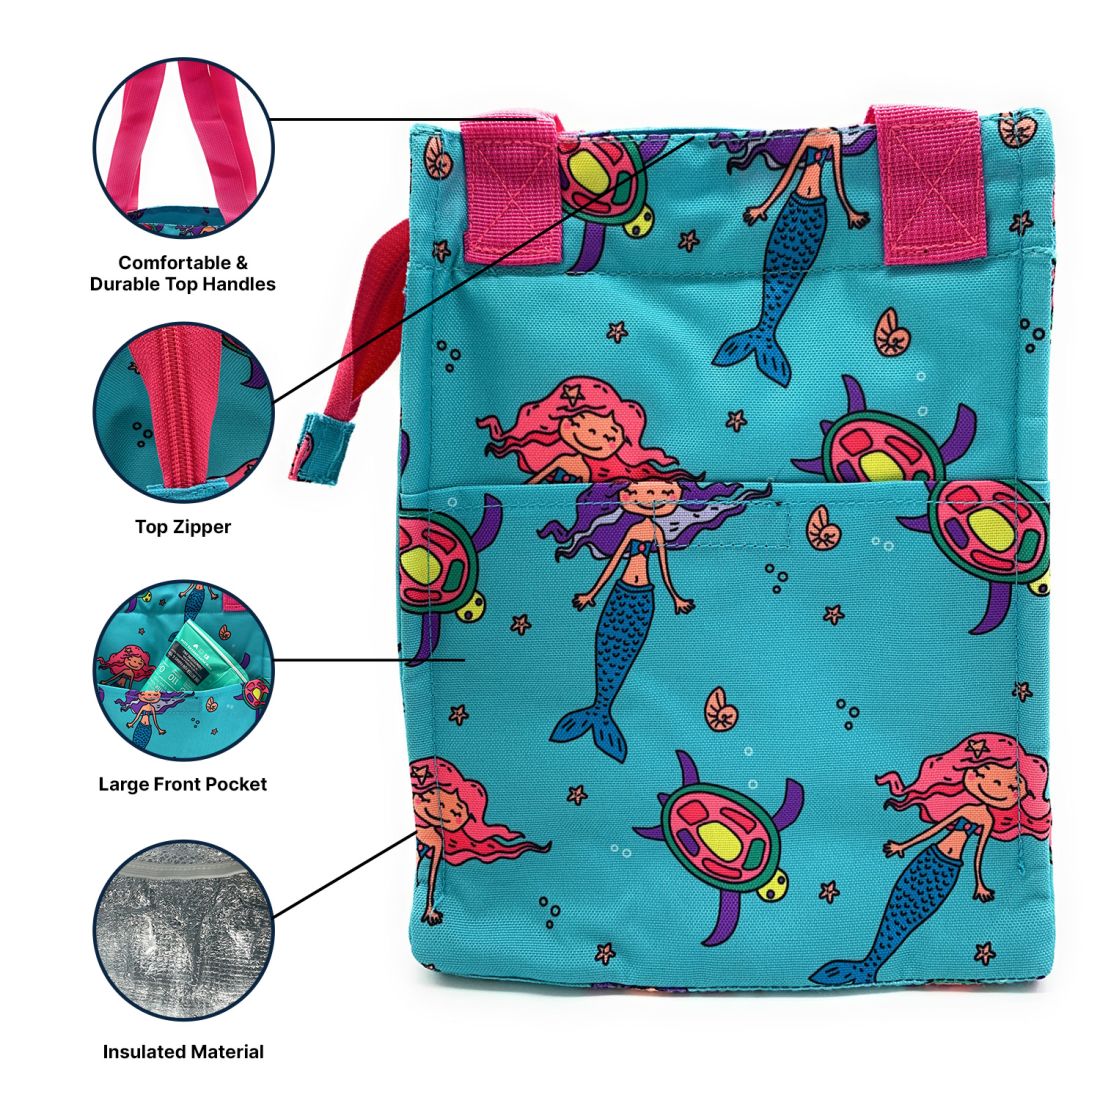 Empire Cove Insulated Lunch Bag Kids Adults Cooler Food Tote Picnic Travel Mermaid